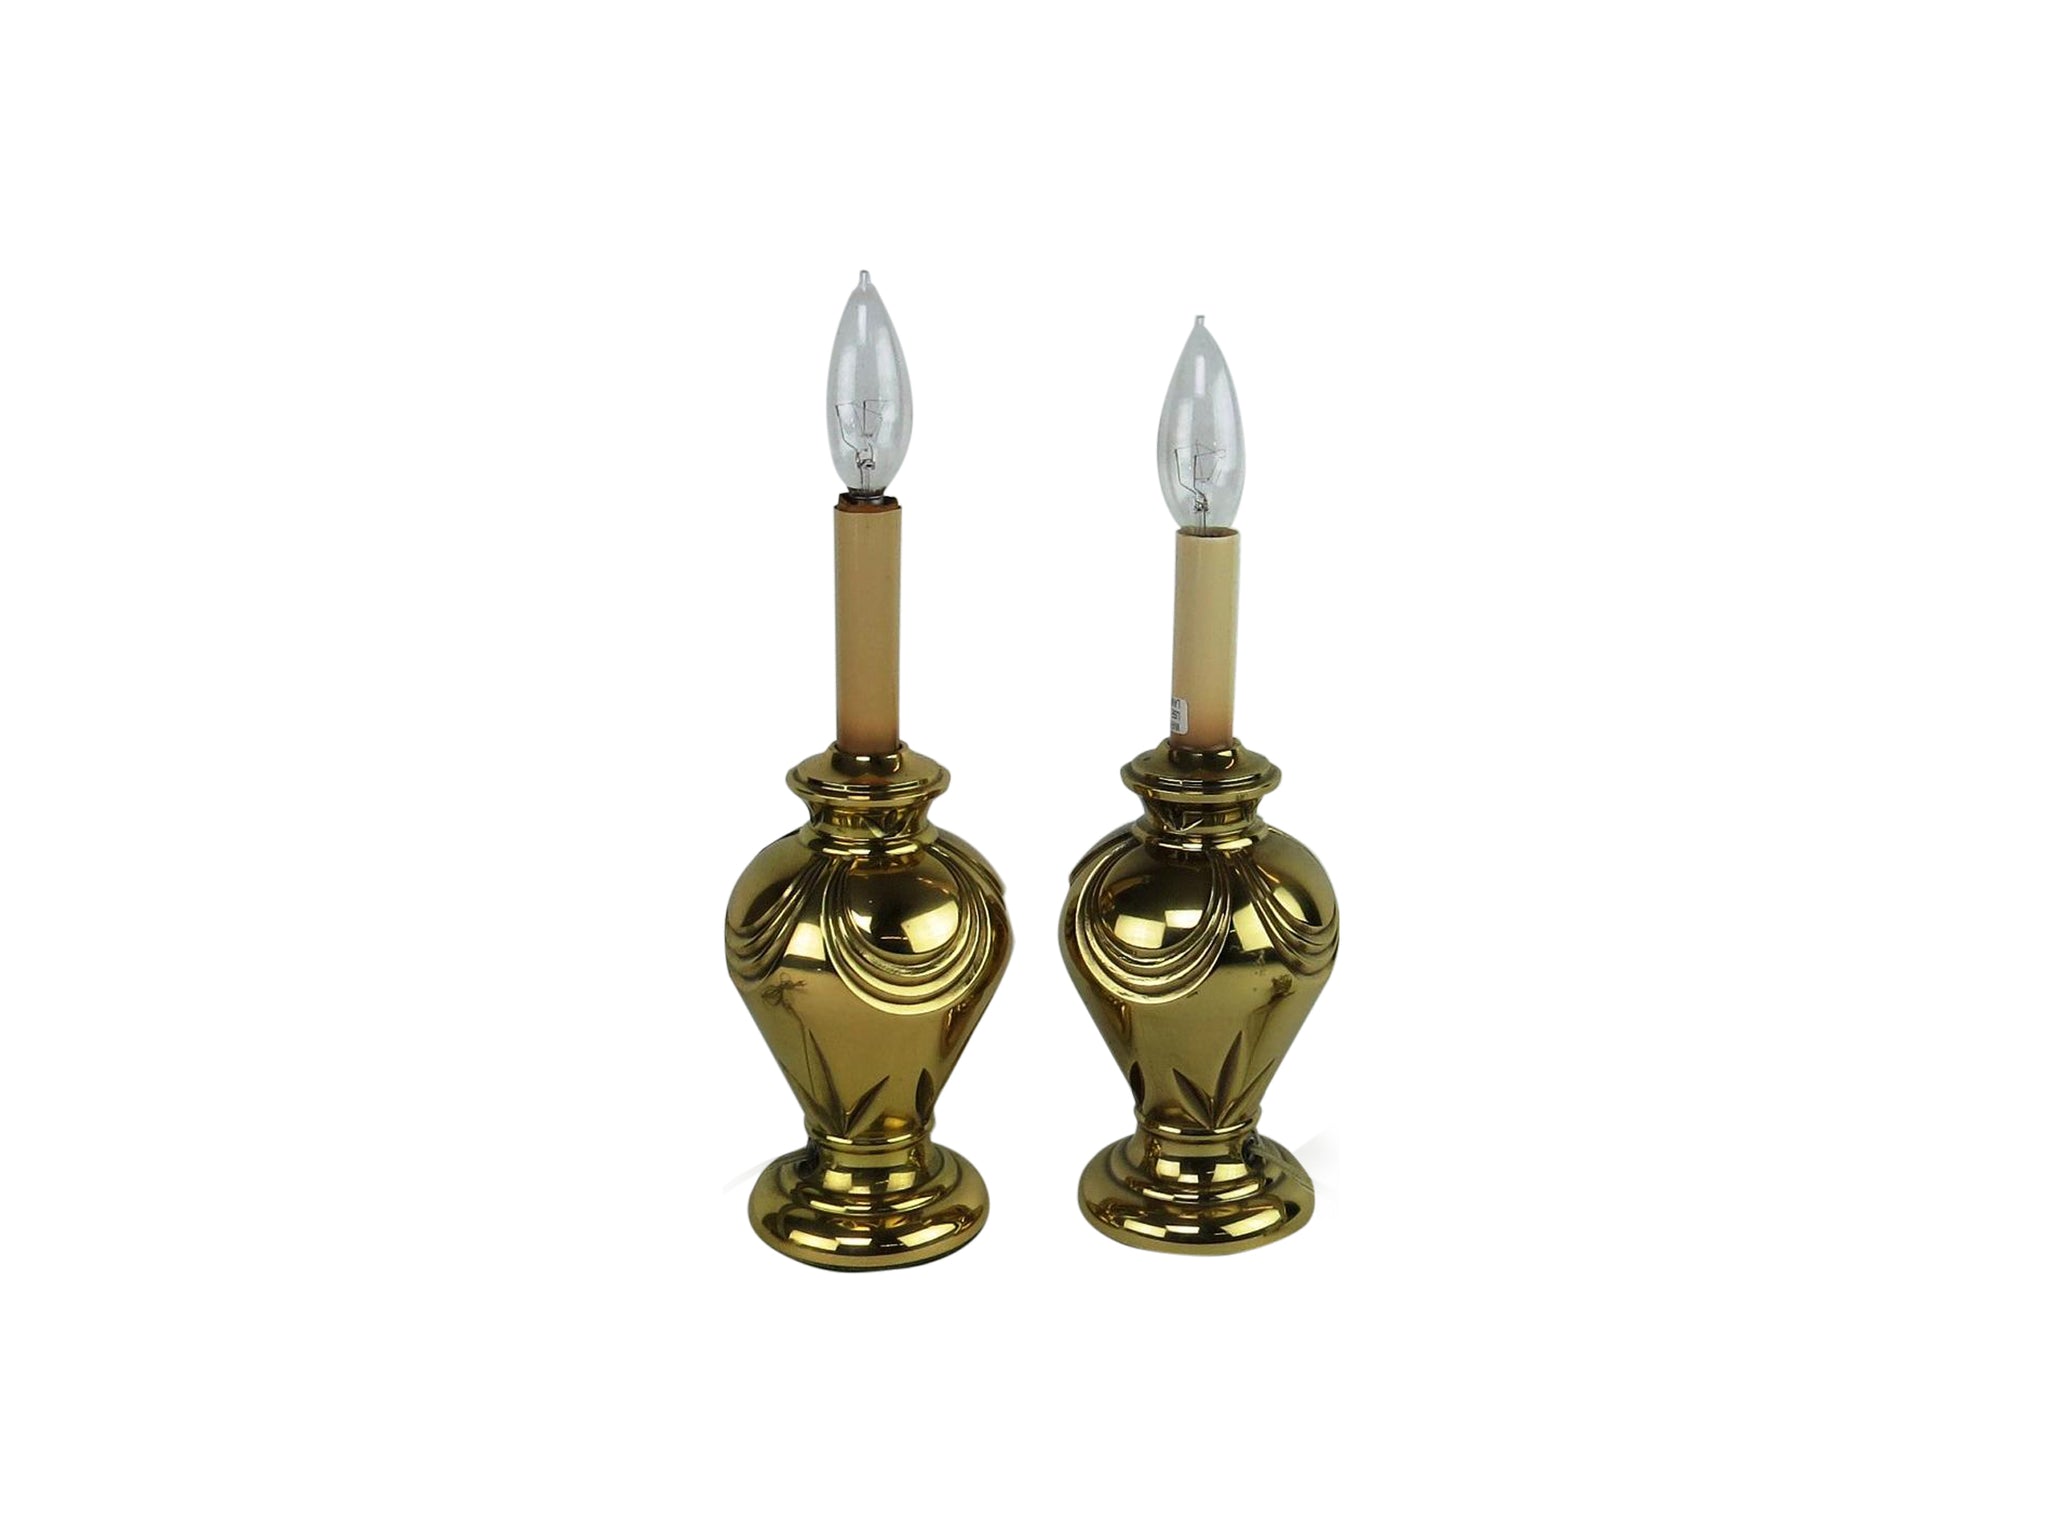 Vintage Mini Solid Brass Bedside Lamps by Stiffel - a Pair – edgebrookhouse